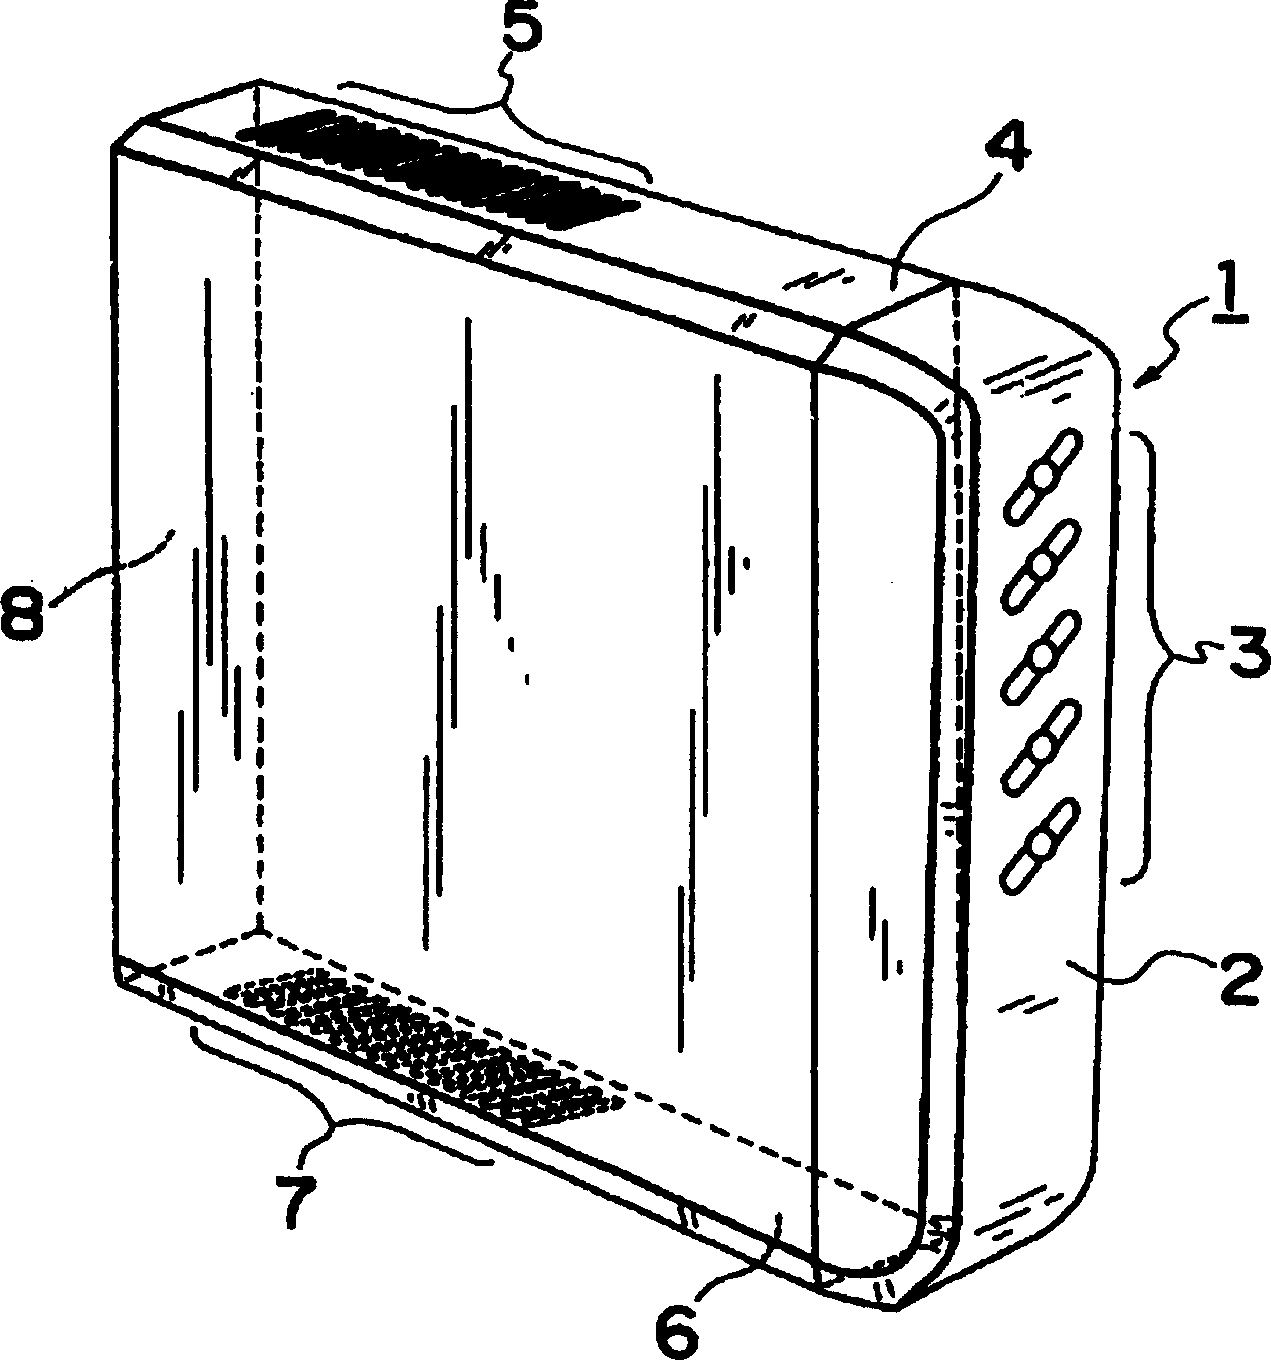 Thin type cable modem and stand for mounting the same